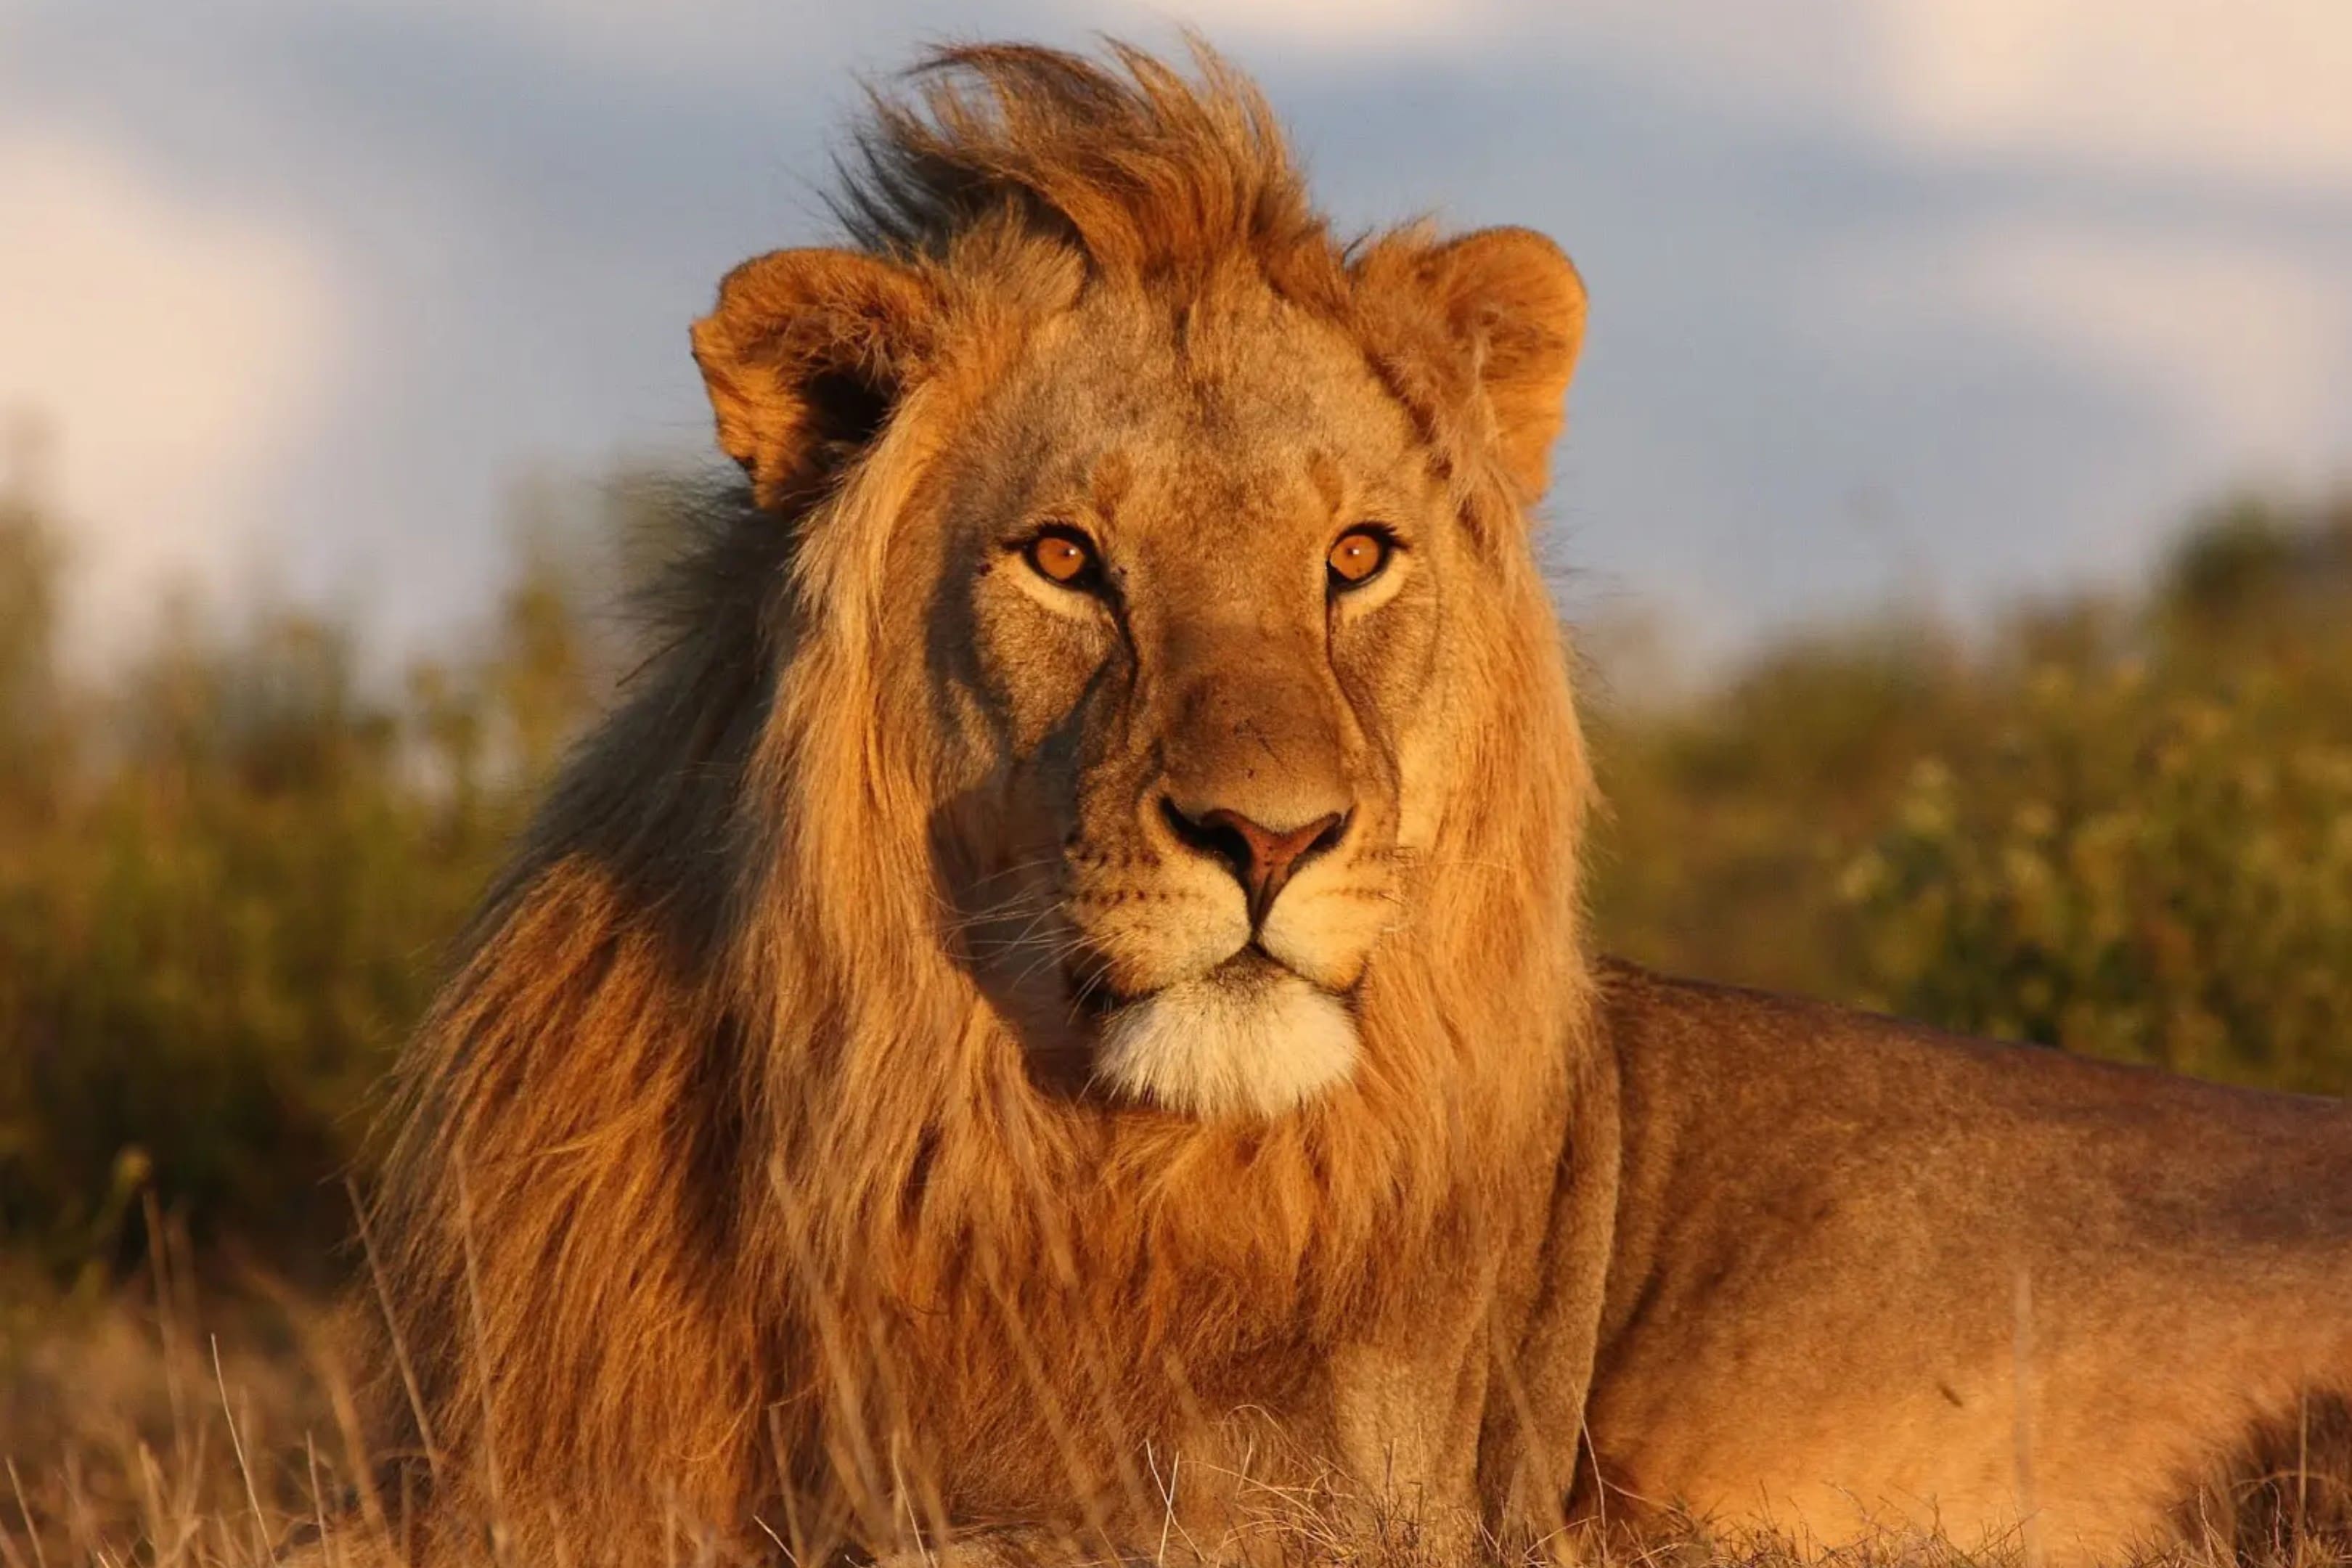 A lion is looking at the camera with his mane blowing in the wind.